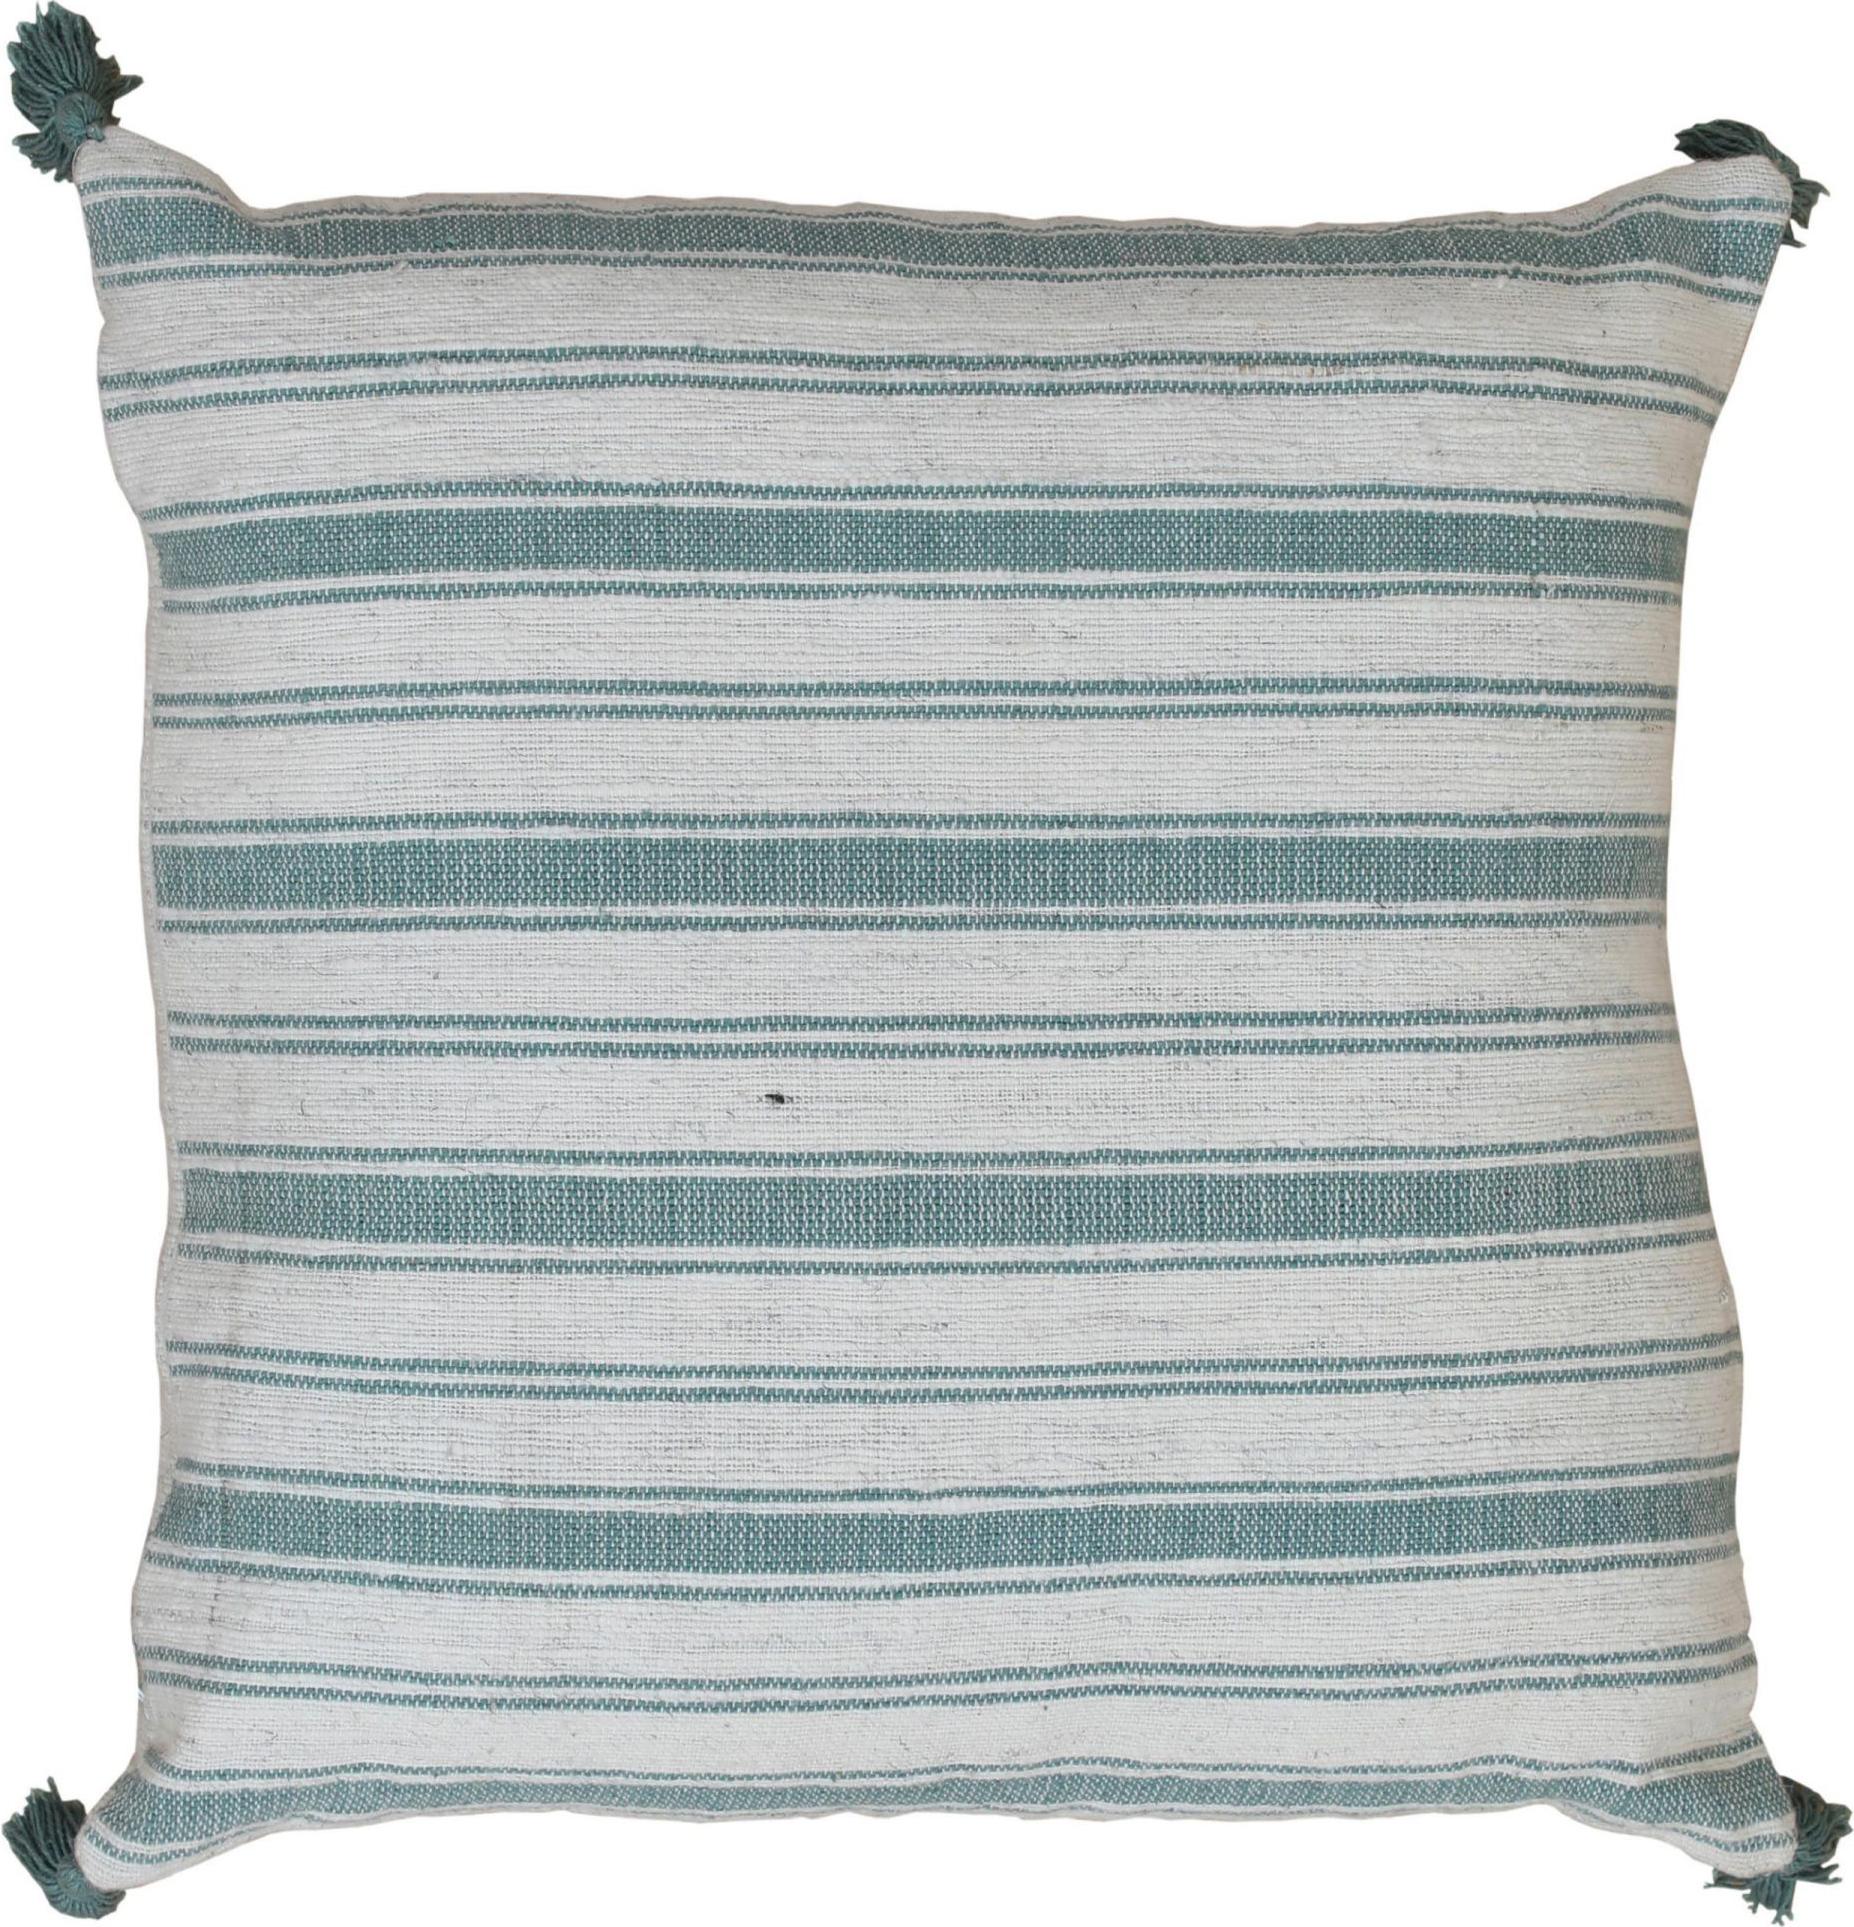 Hand-Knotted Striped Modern Chic Wool and Cotton Pillow In Green and Beige For Sale